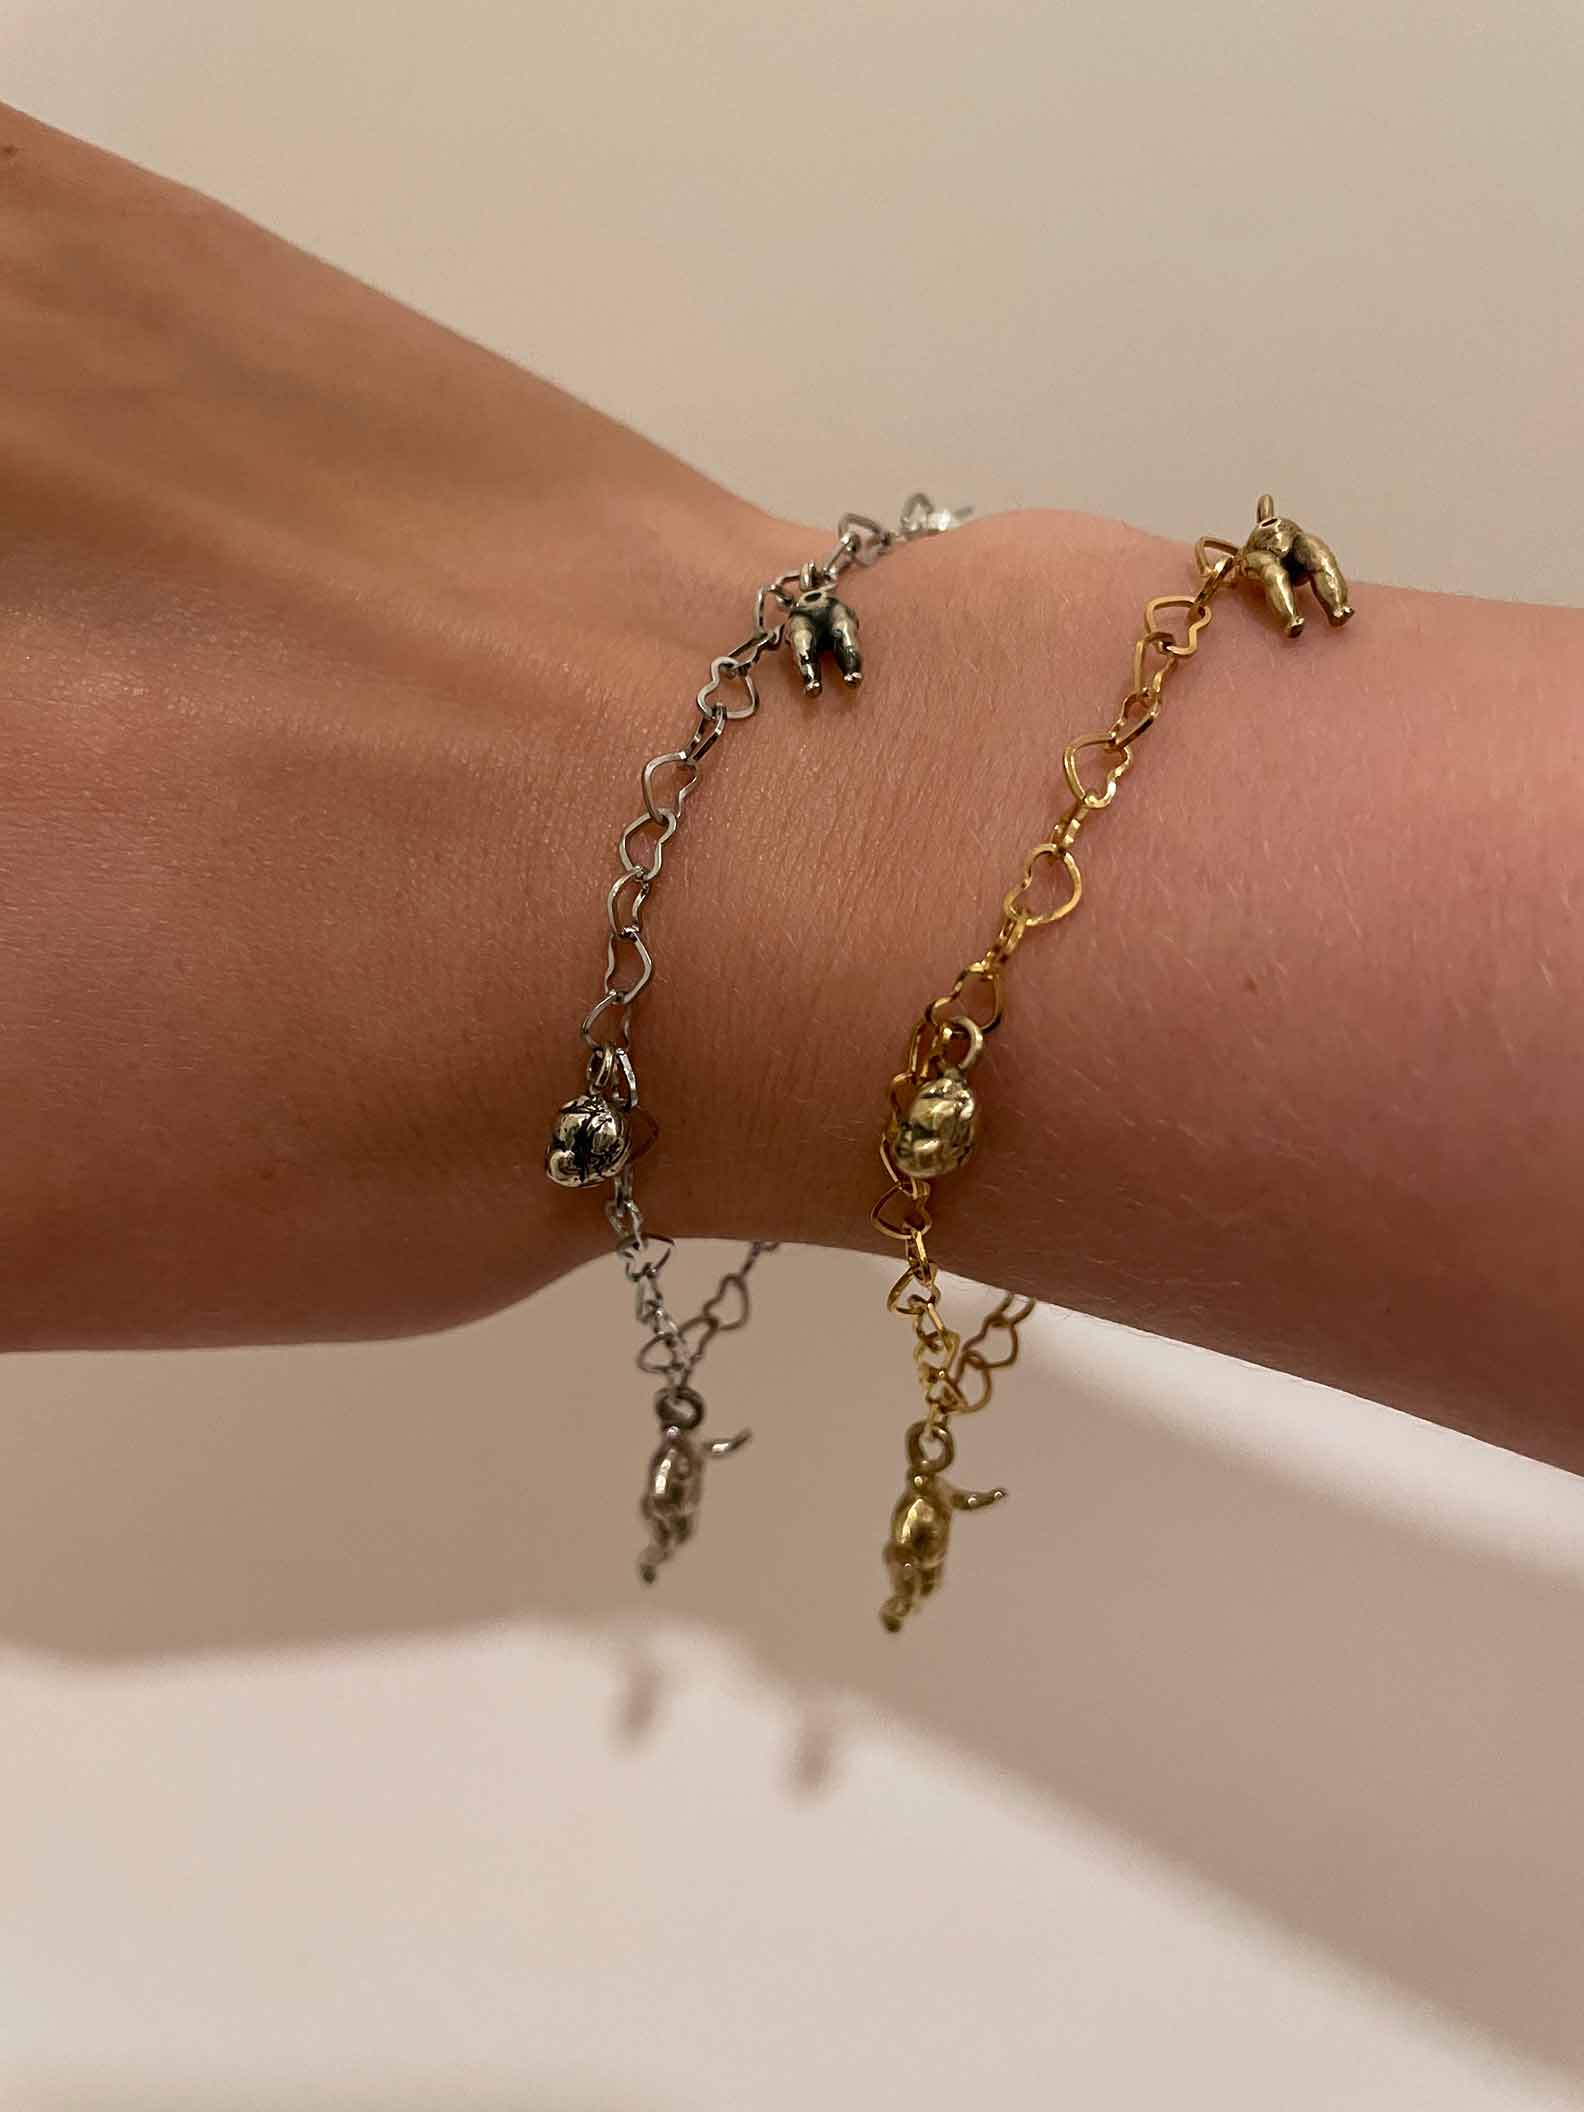 Hand engraved child silhouette charm bracelet with double chain in Silver,  10K Gold, 14K Gold or 18K Gold